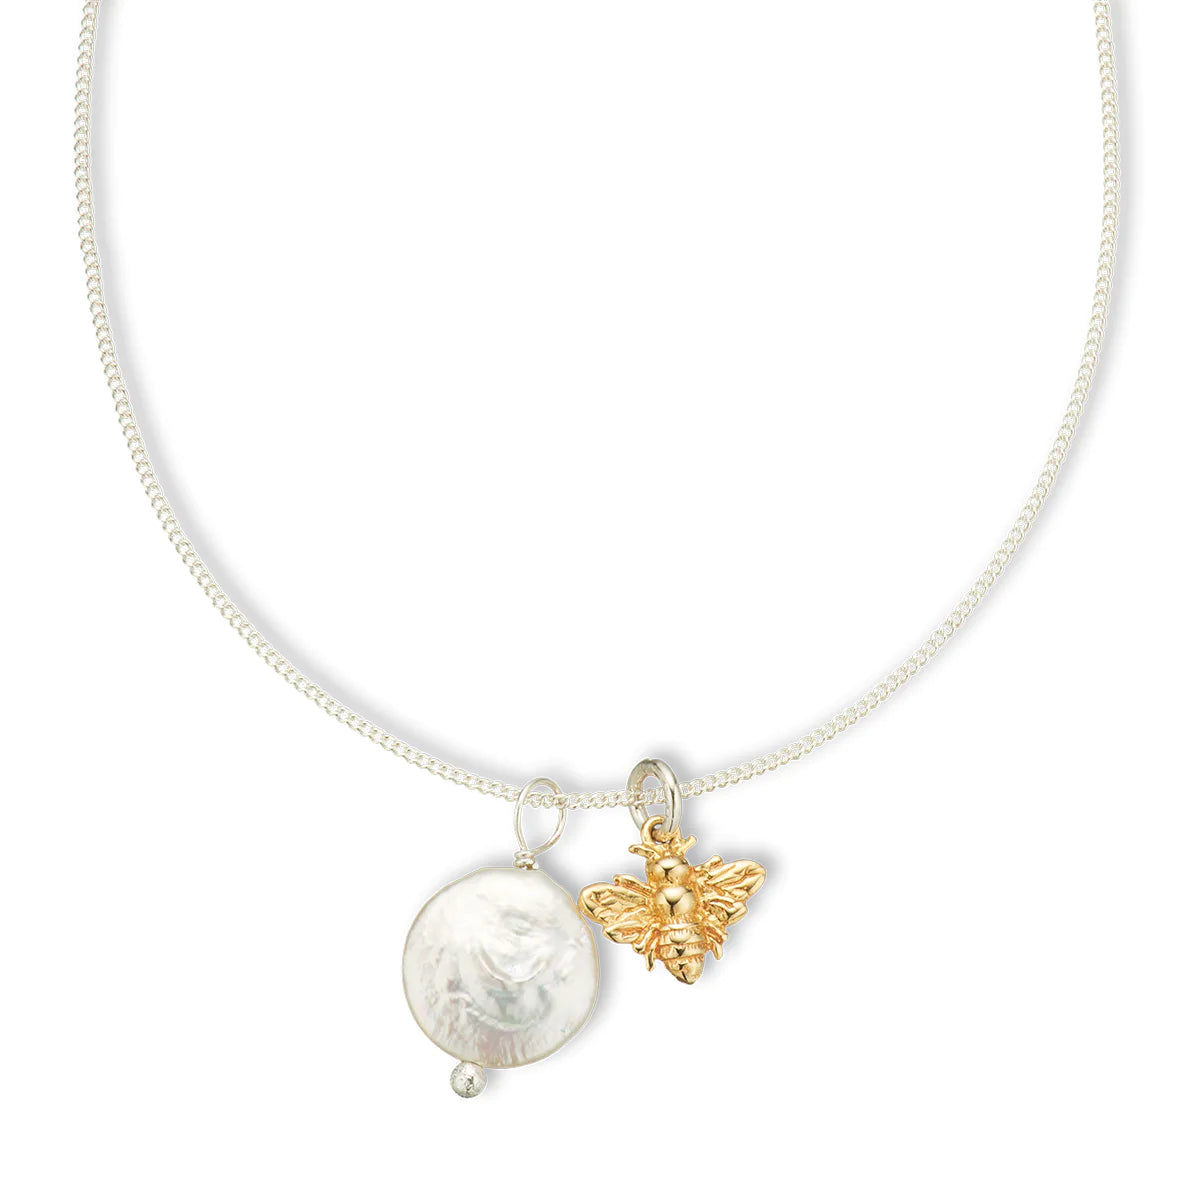 Pearl Amulet Necklace |  Golden Bee